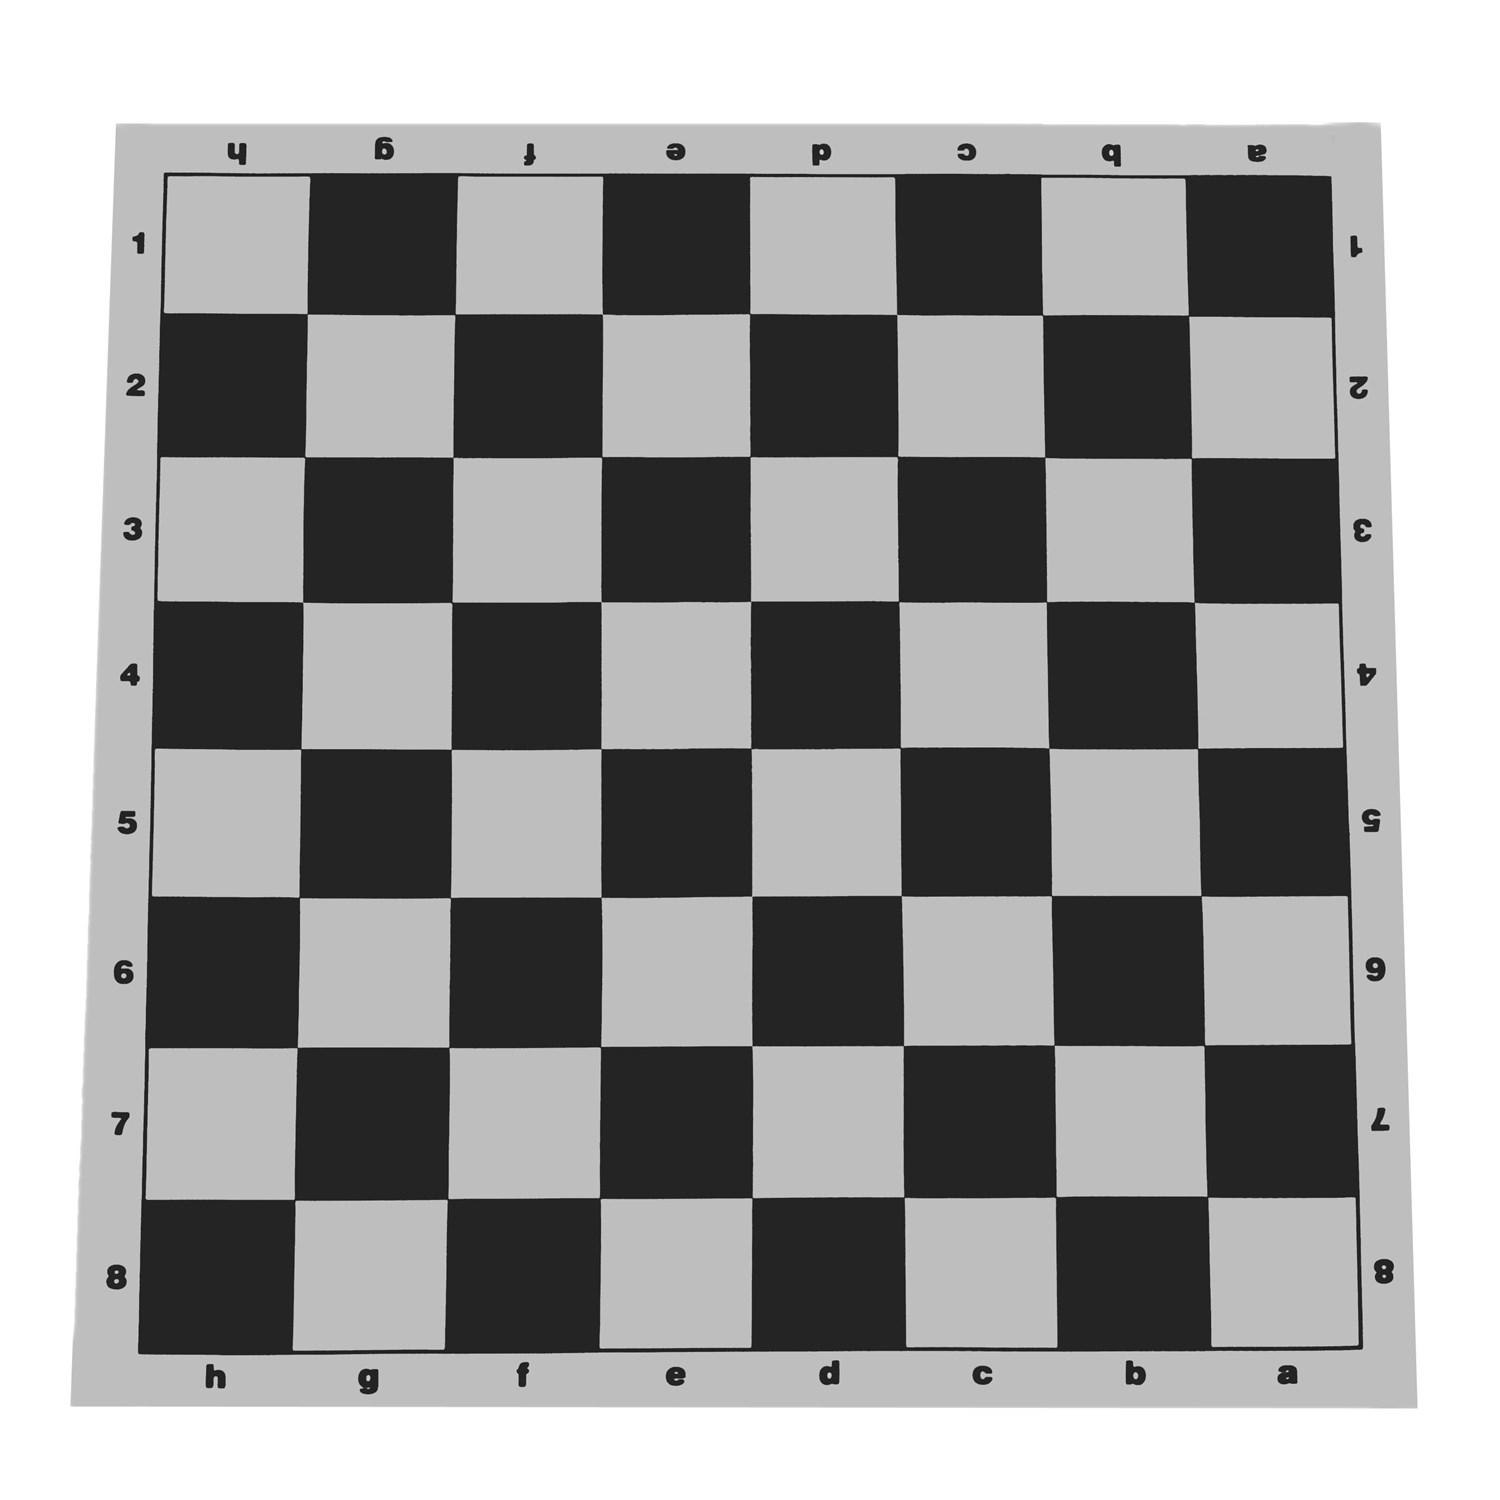 VINYL WITH BLACK SQUARES TOURNAMENT ROLL UP CHESS BOARD 